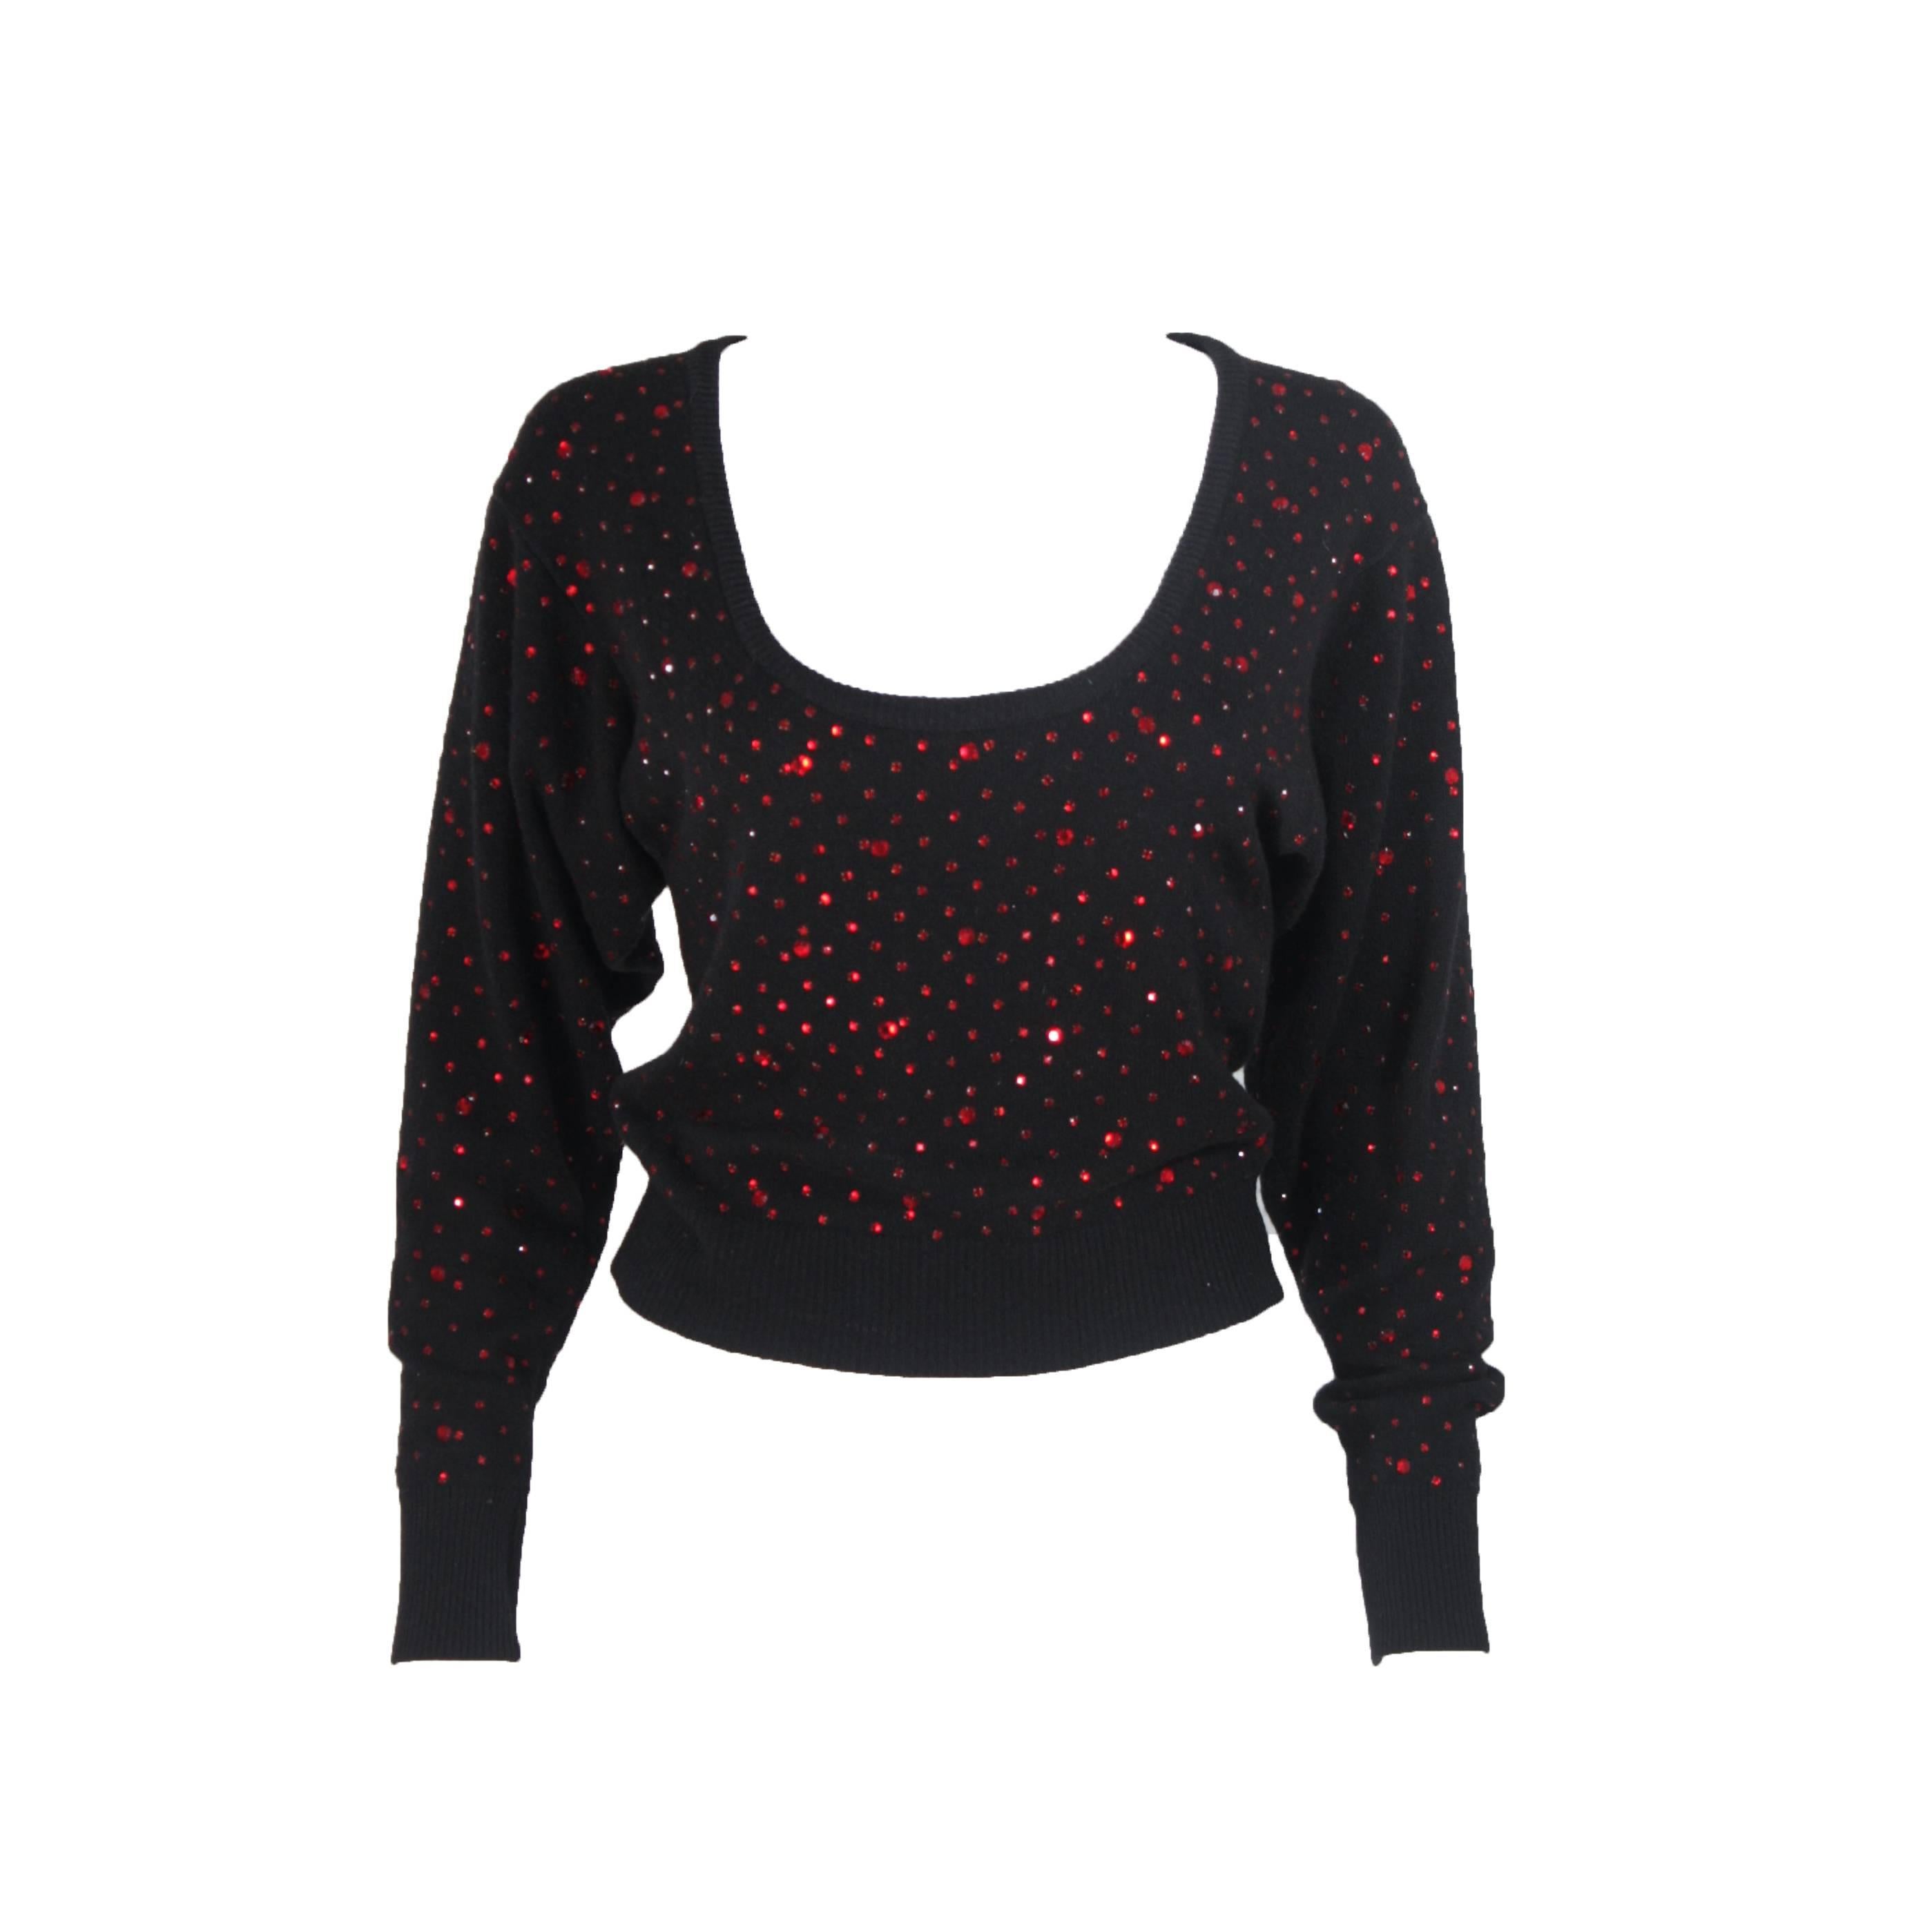 NEIMAN MARCUS Black Wool Knit Sweater with Red Rhinestone Applique Size M/L For Sale